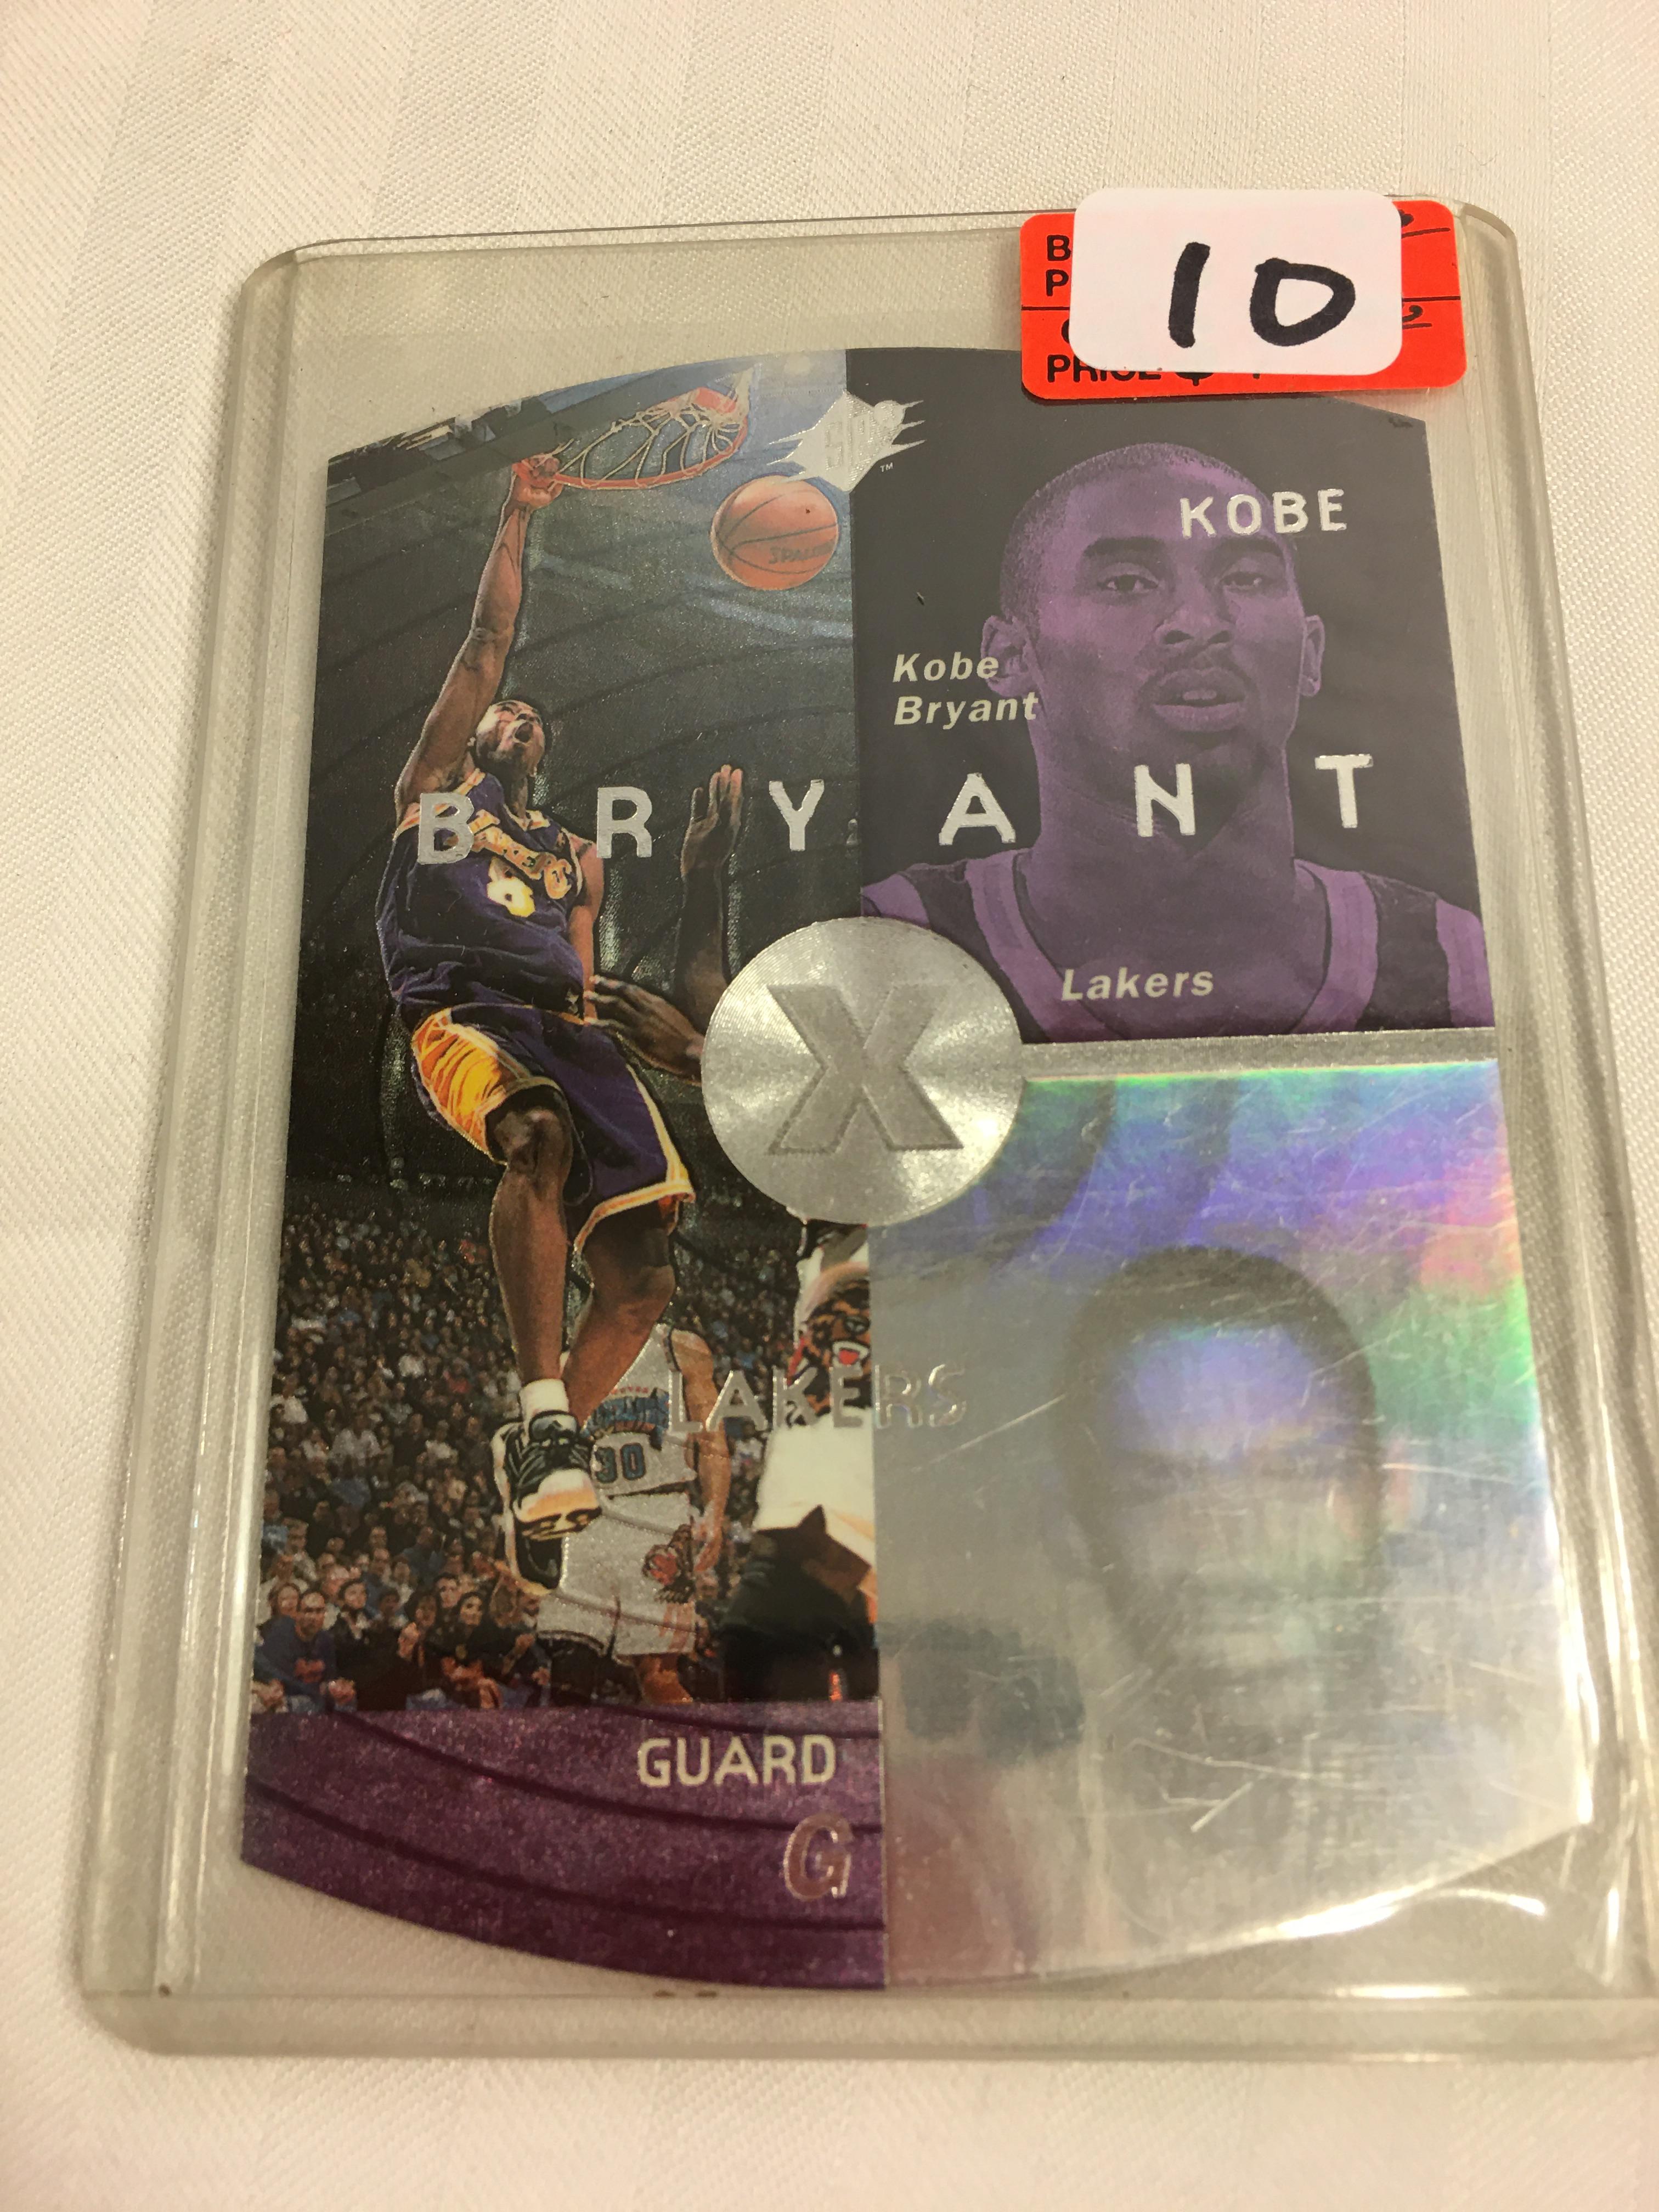 Collector 1998 Upper Deck SPX Silver Kobe Bryant #21 Foil SP Holoview Insert Lakers Sport card